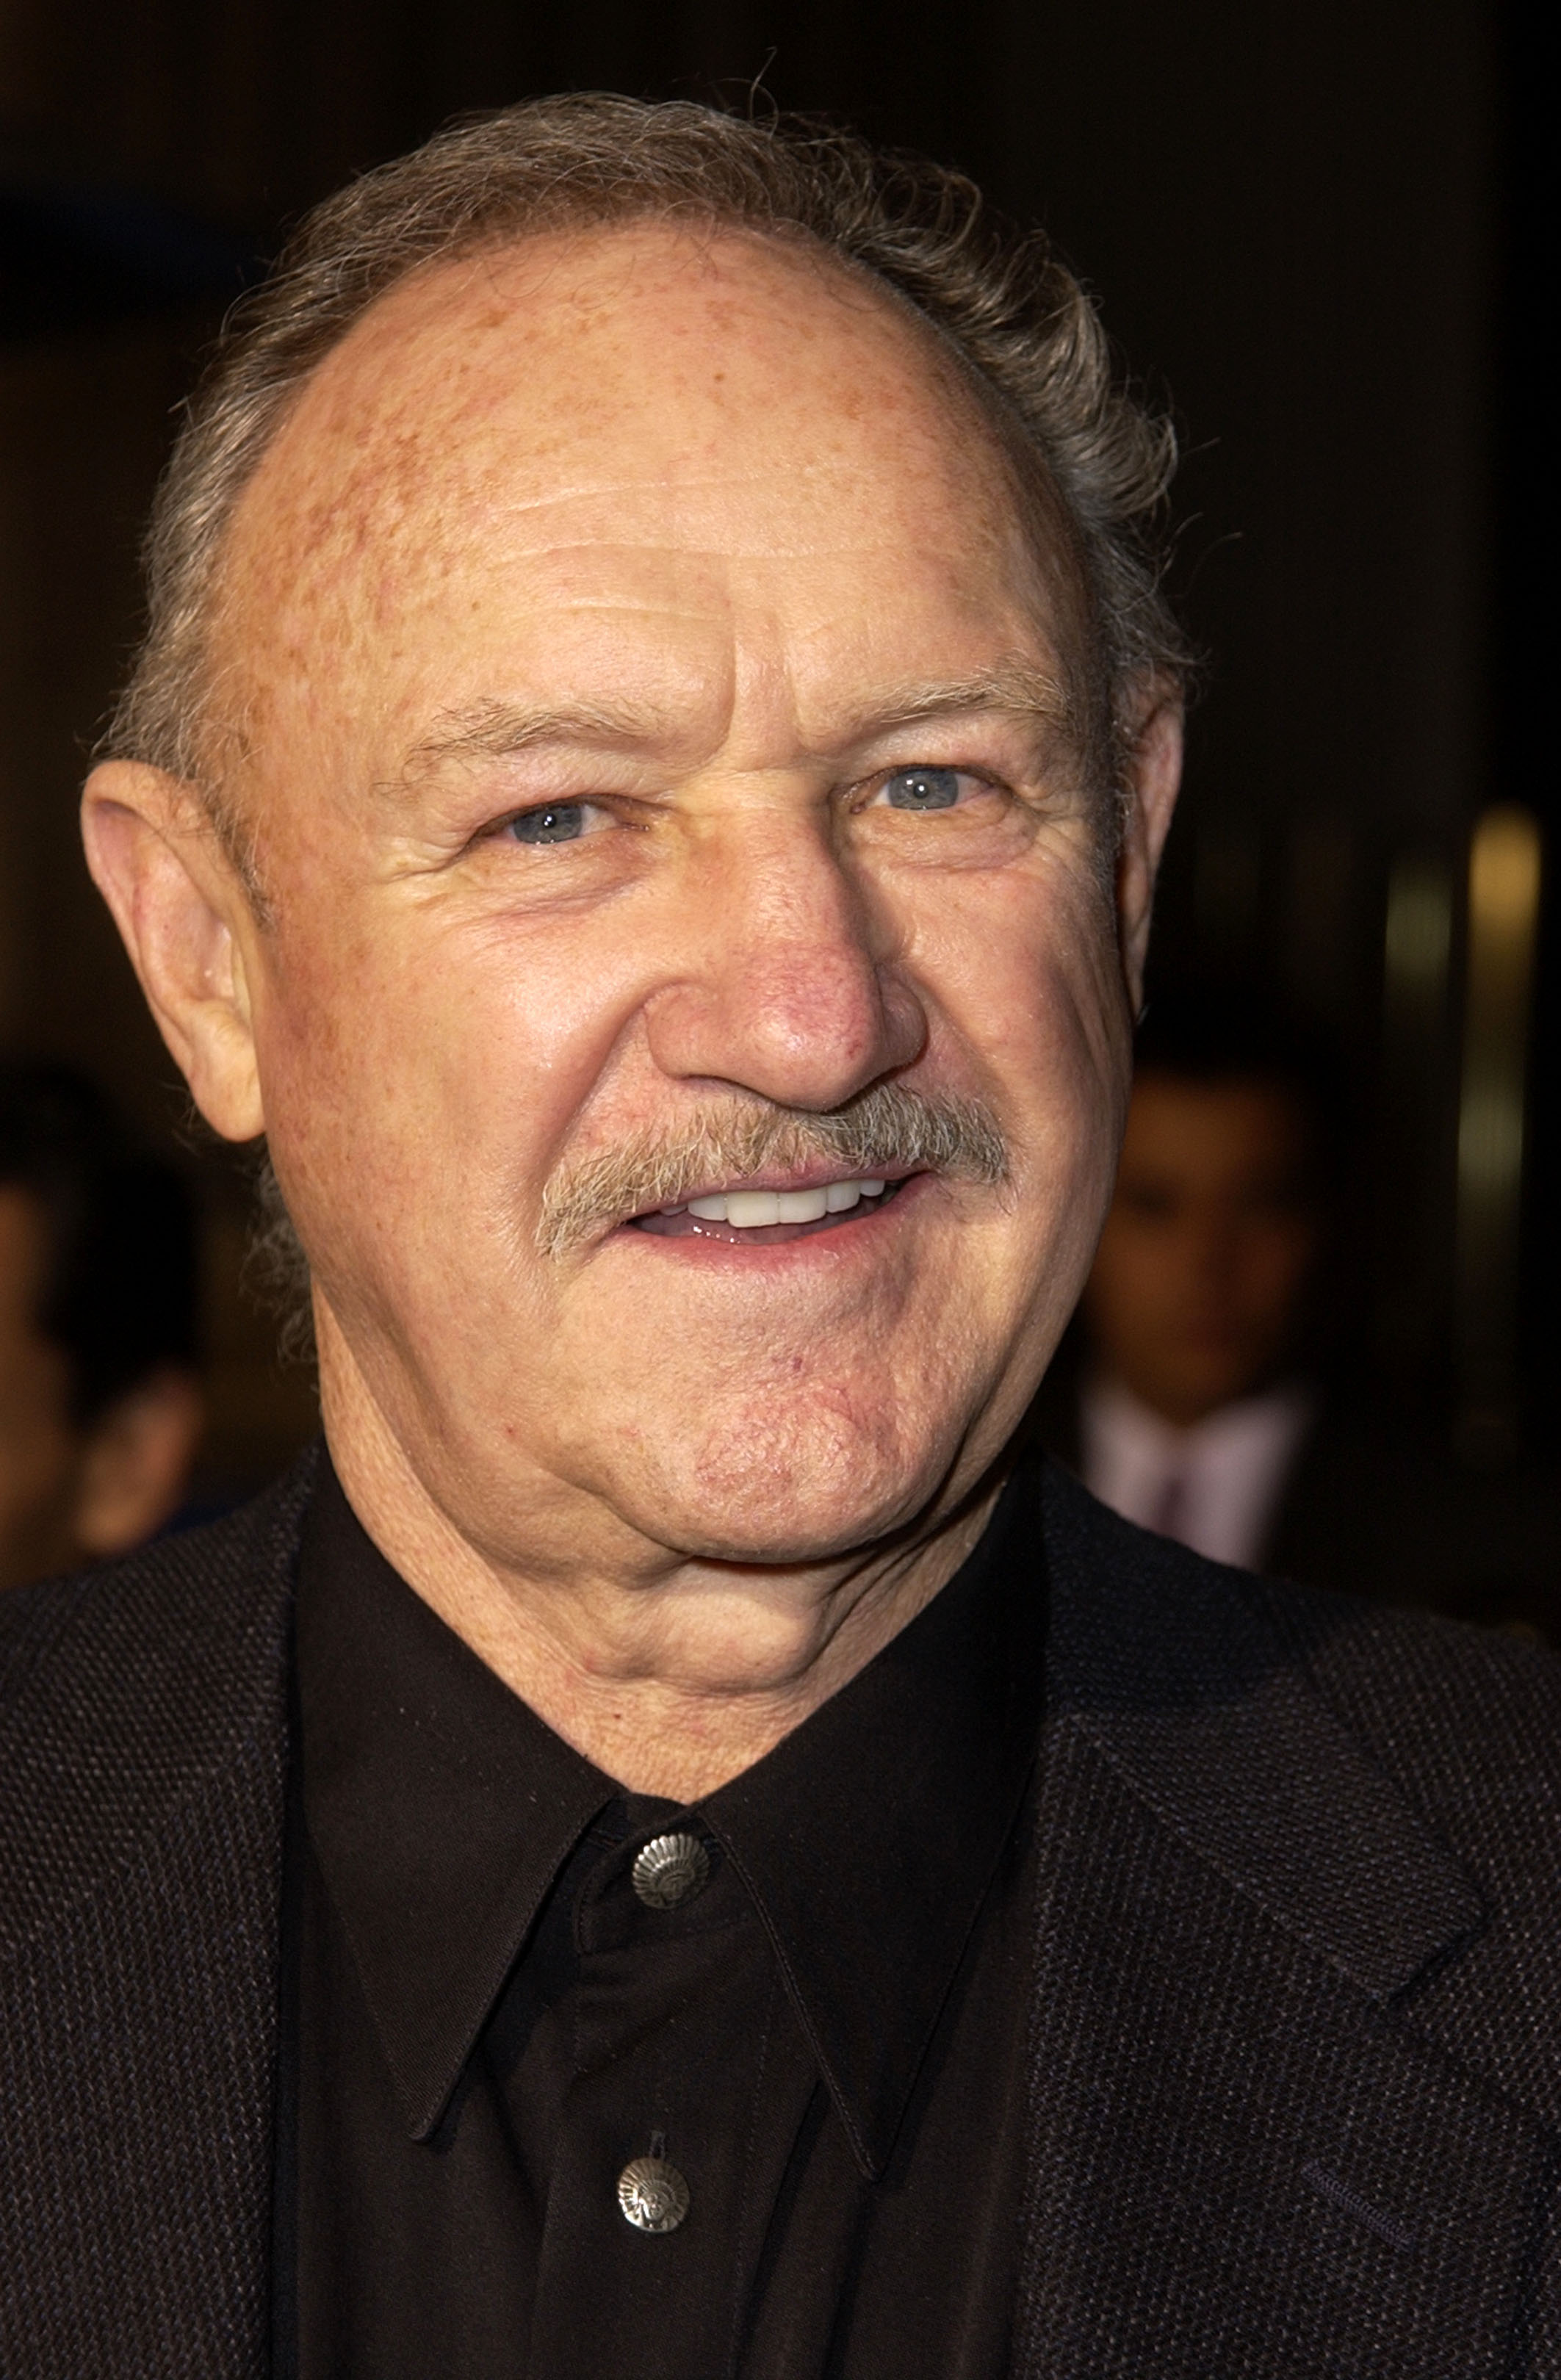 Gene Hackman during "The Royal Tenenbaums" Los Angeles premiere on December 6, 2001 | Source: Getty Images